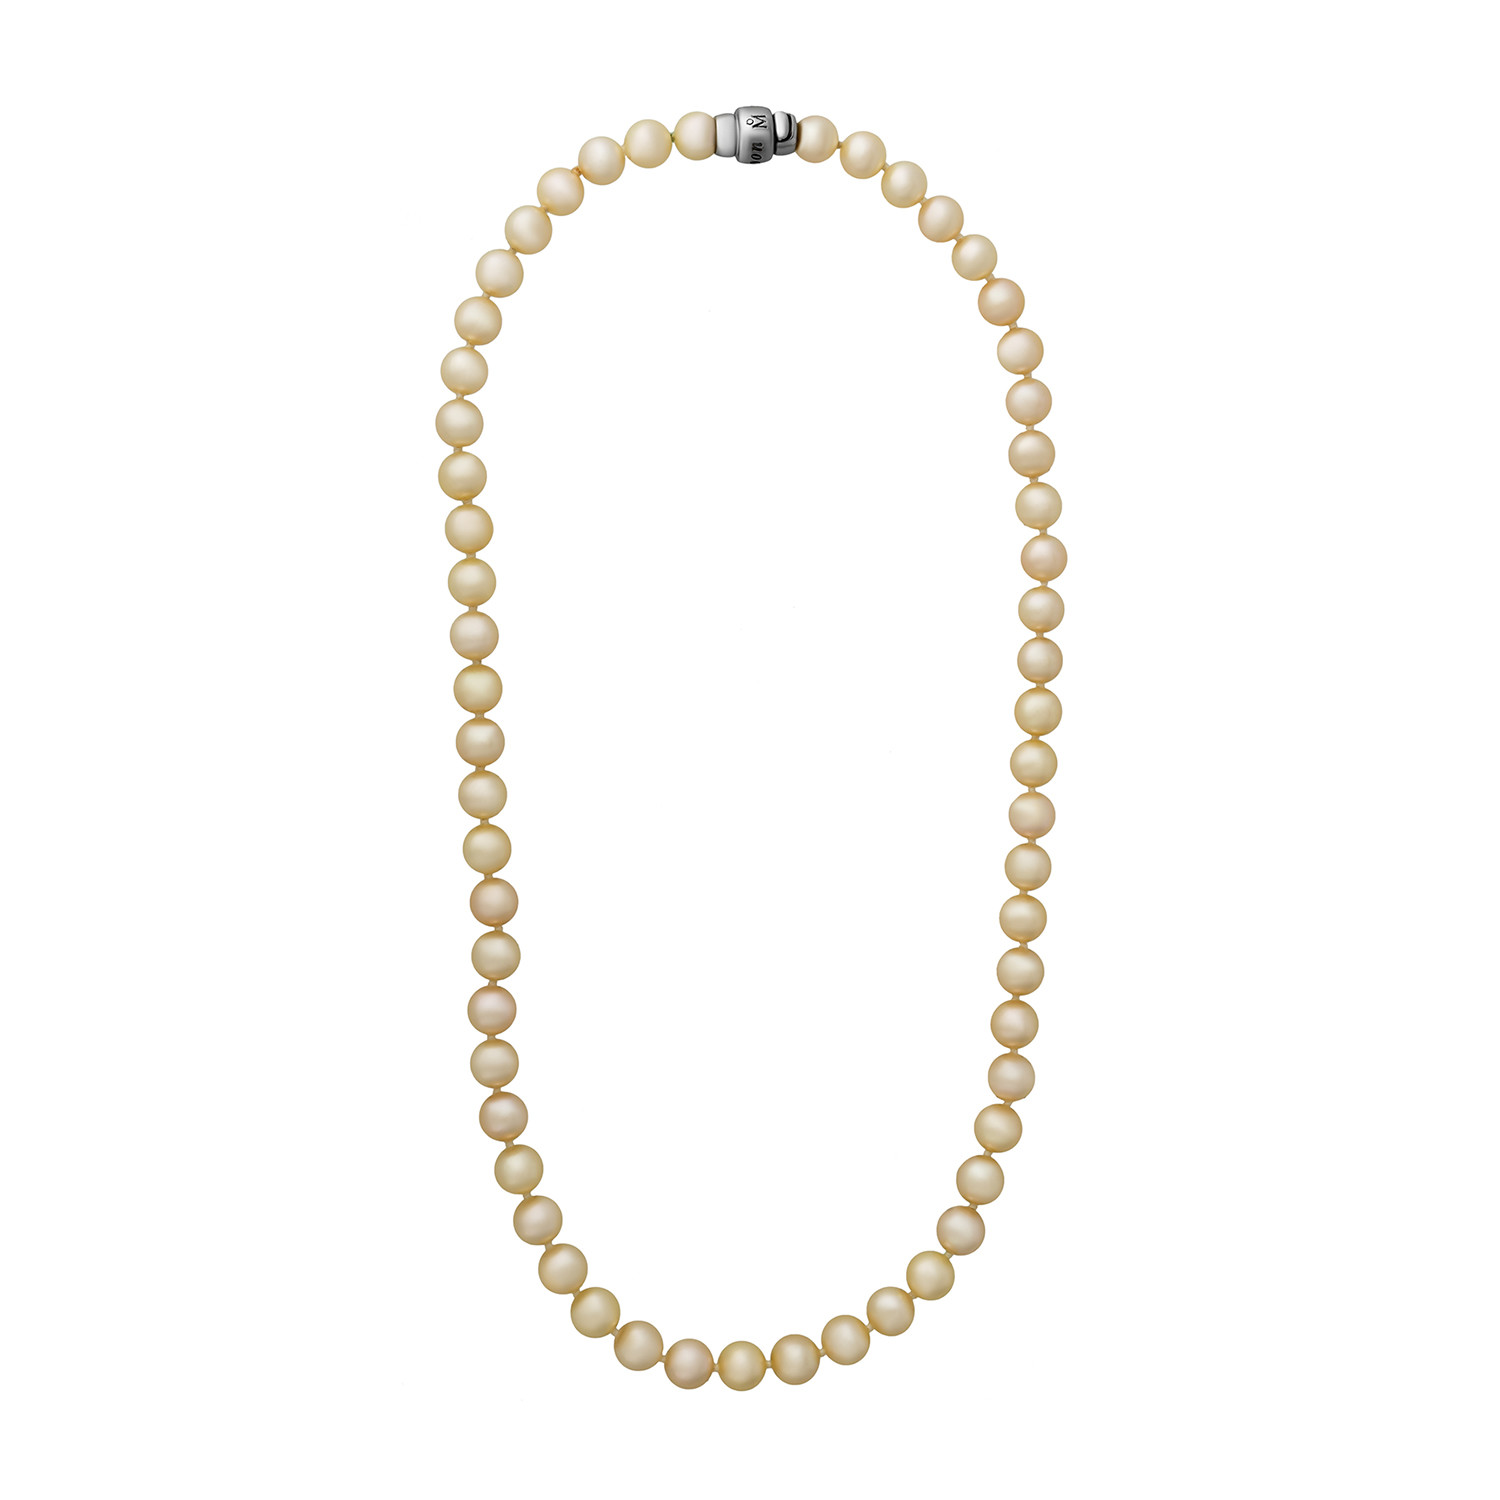 Vintage Mikimoto 18k White Gold Clasp + String of Pearls Necklace ...